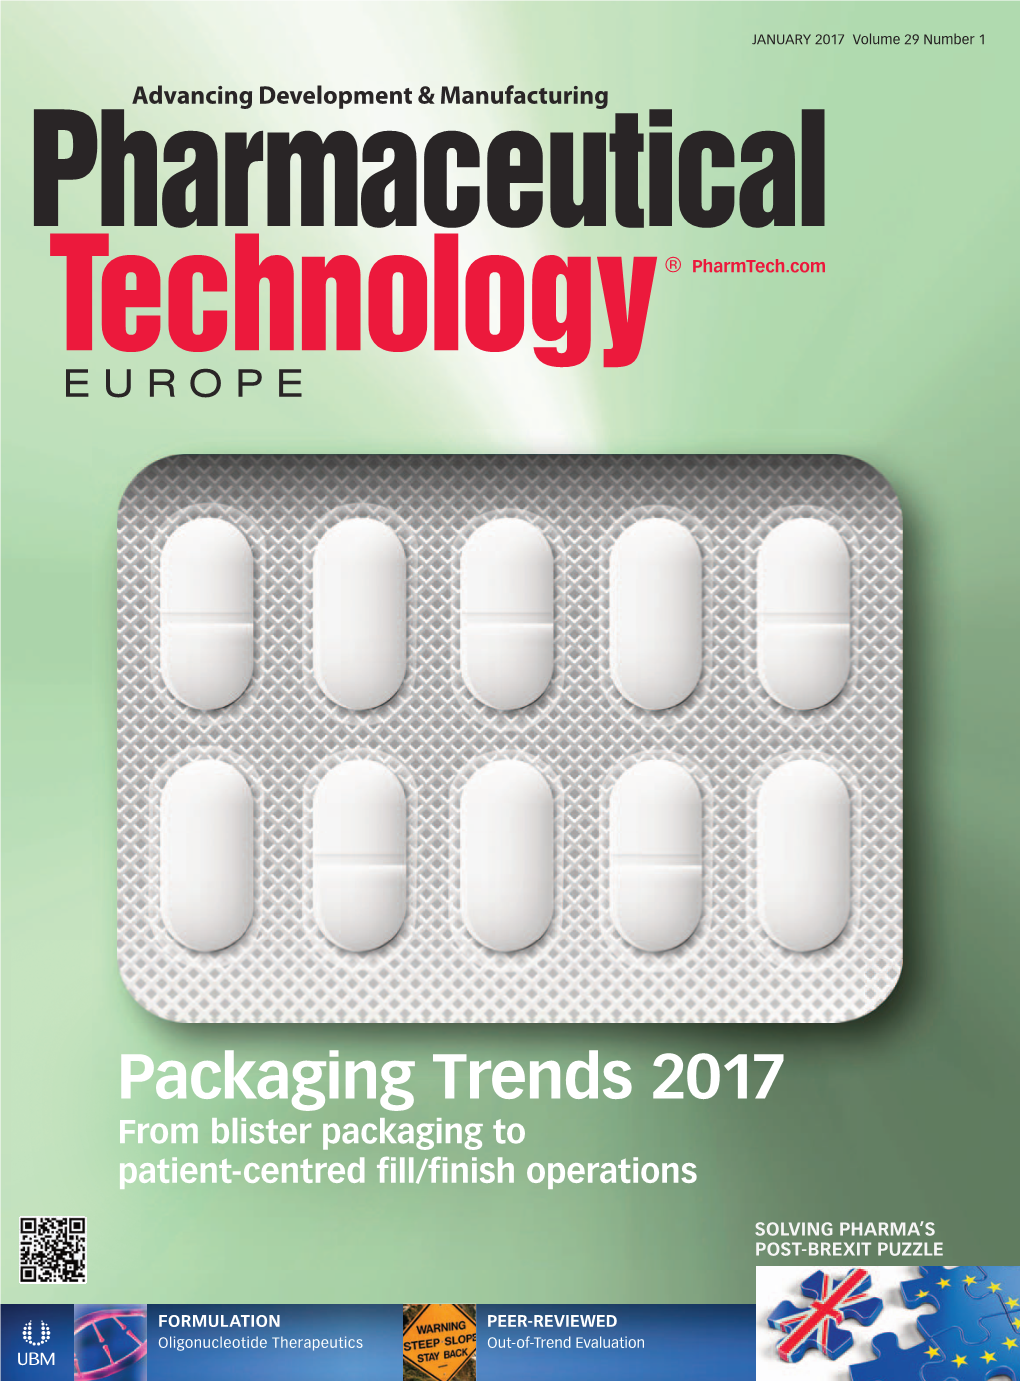 Packaging Trends 2017 from Blister Packaging to Patient-Centred Fill/Finish Operations